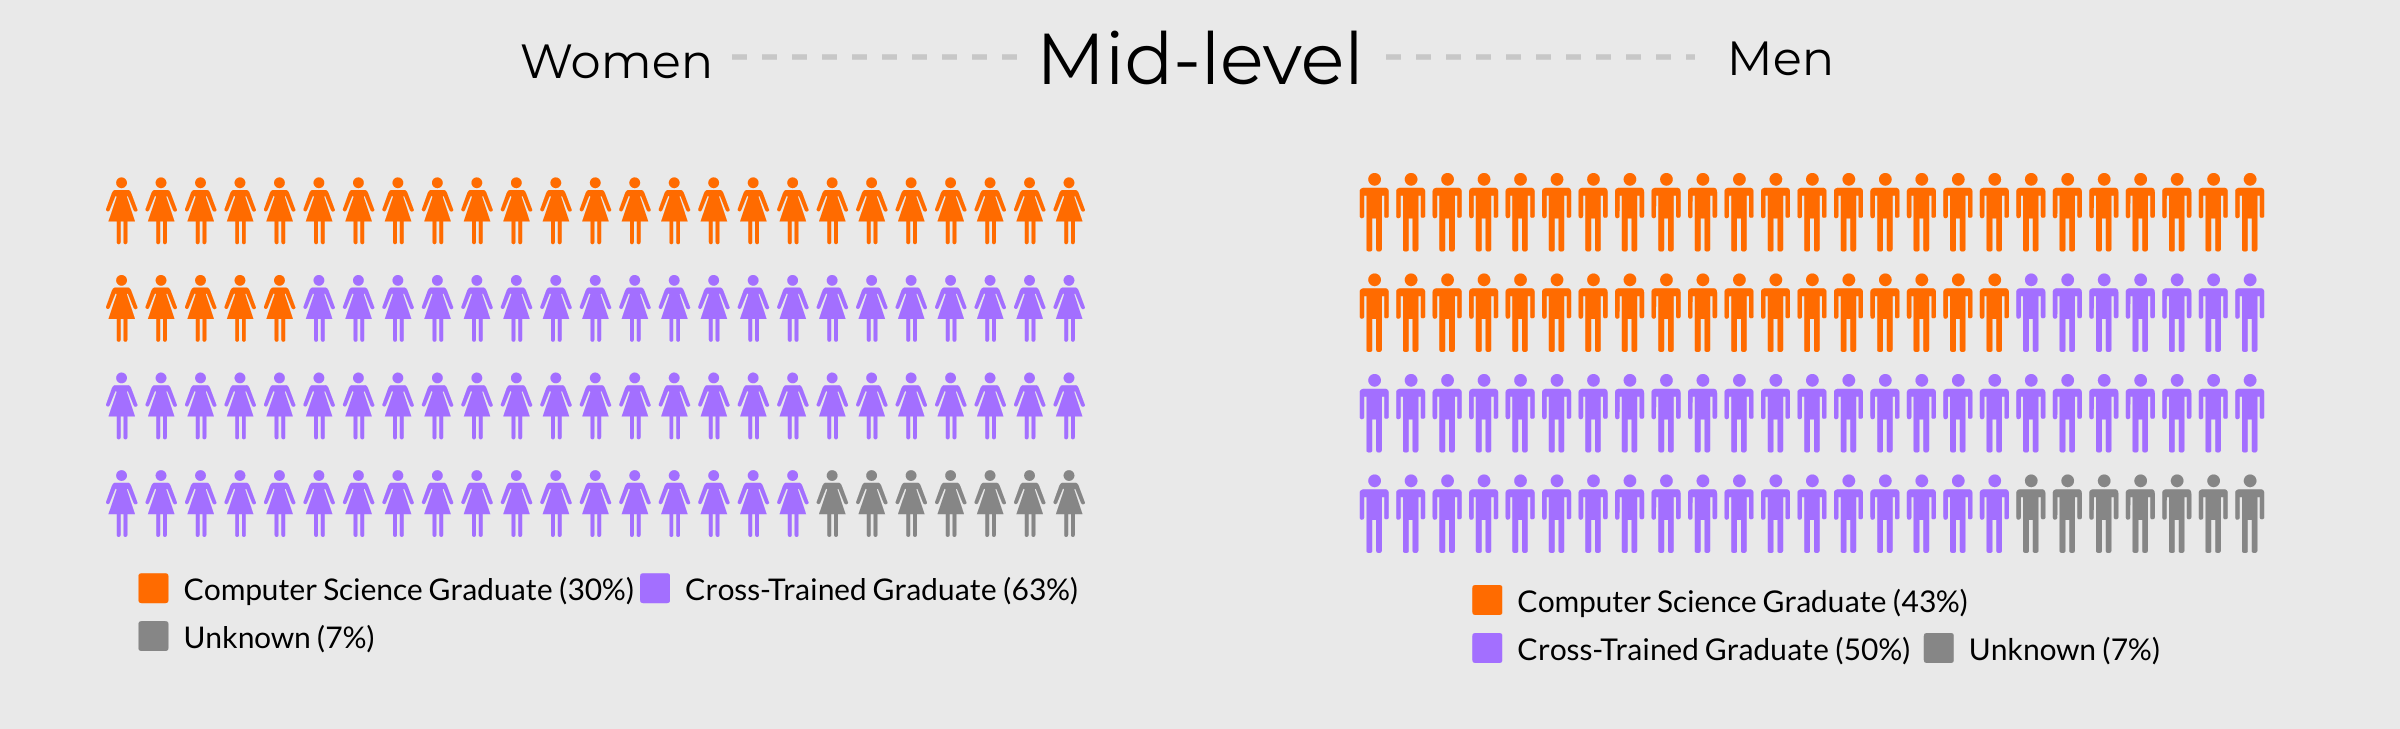 Visualisation comparing what percentage of Mid-level Ruby developers have a degree versus those who complete a bootcamp.